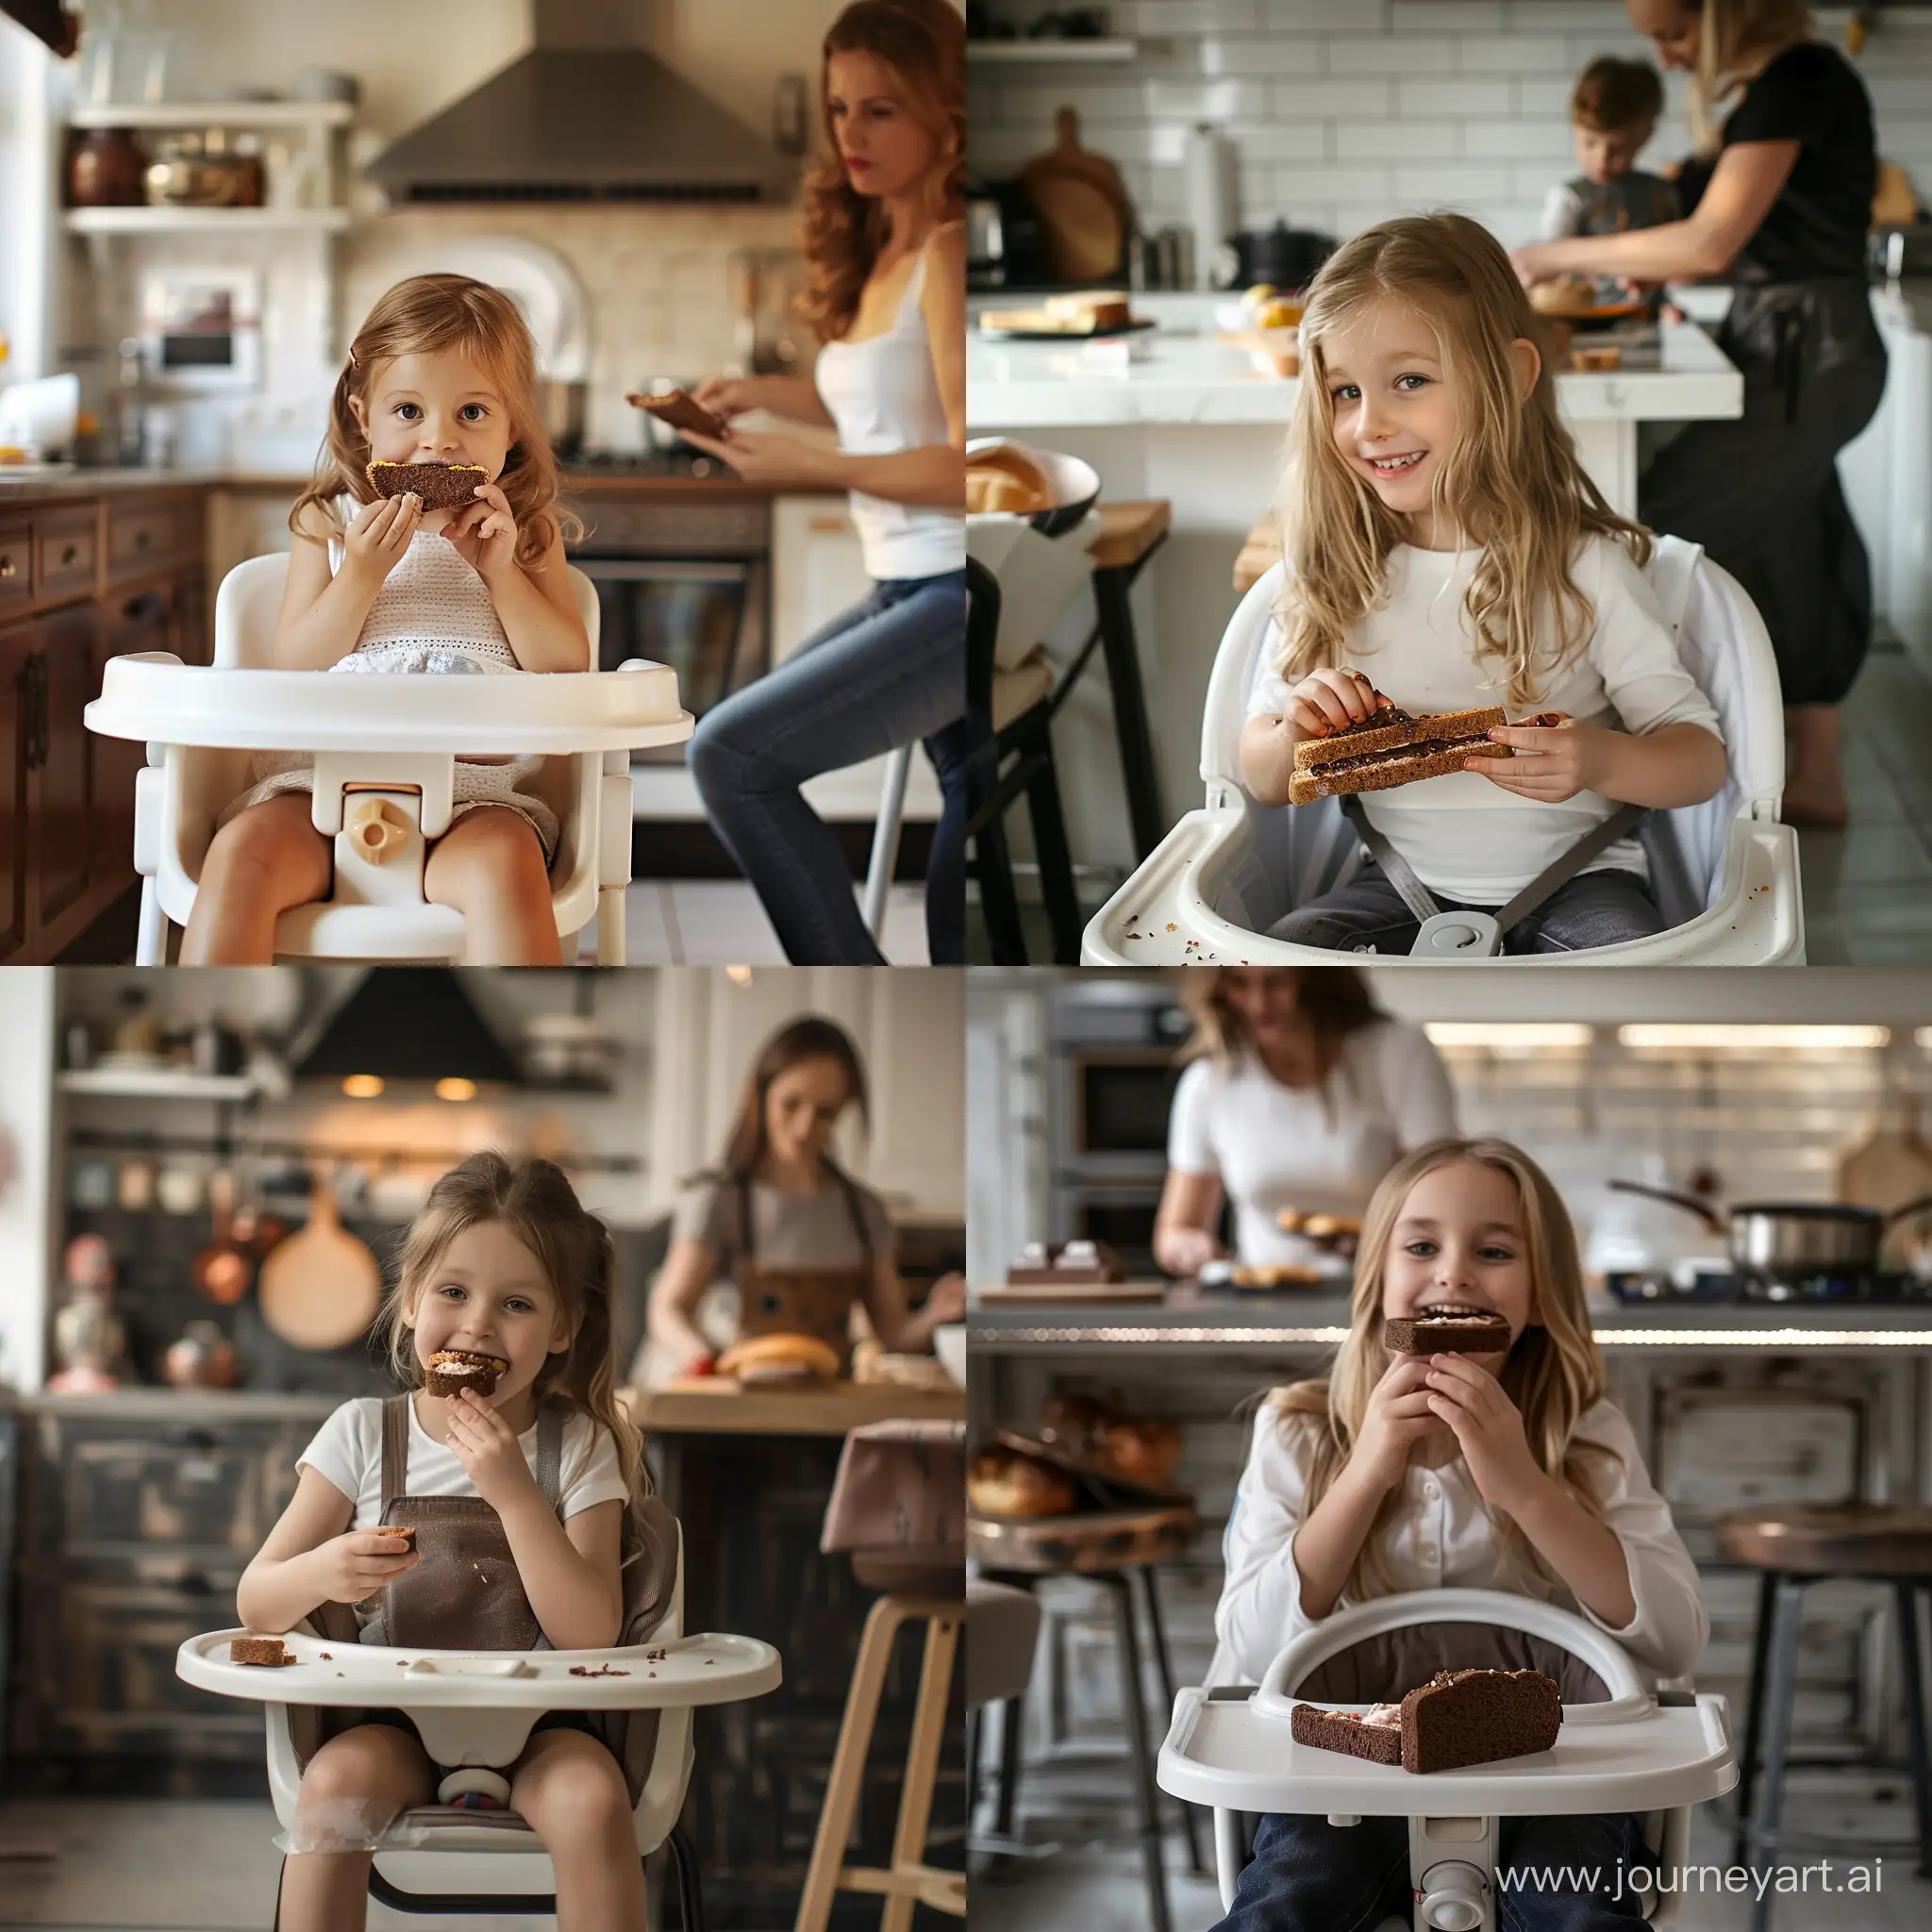 young girl sitting on highchair in kitchen, eating chocolate sandwich, mother is cooking on the other side